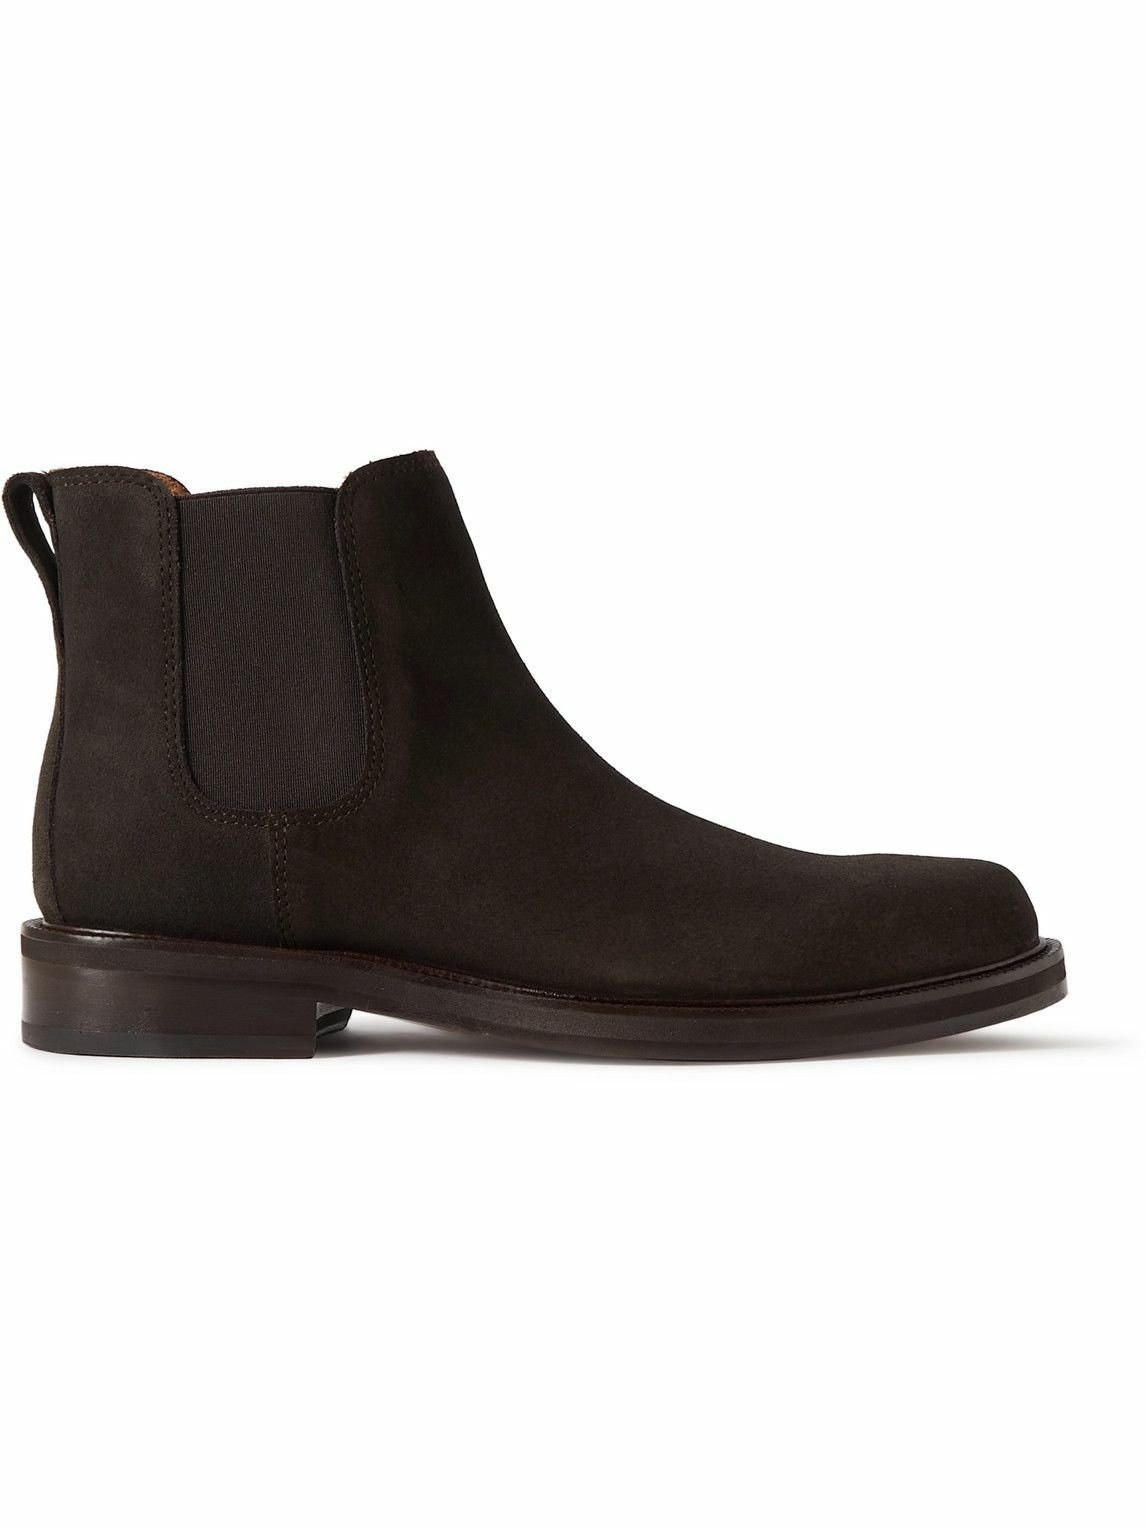 Mr P. - Olie Suede Chelsea Boots - Brown Mr P.